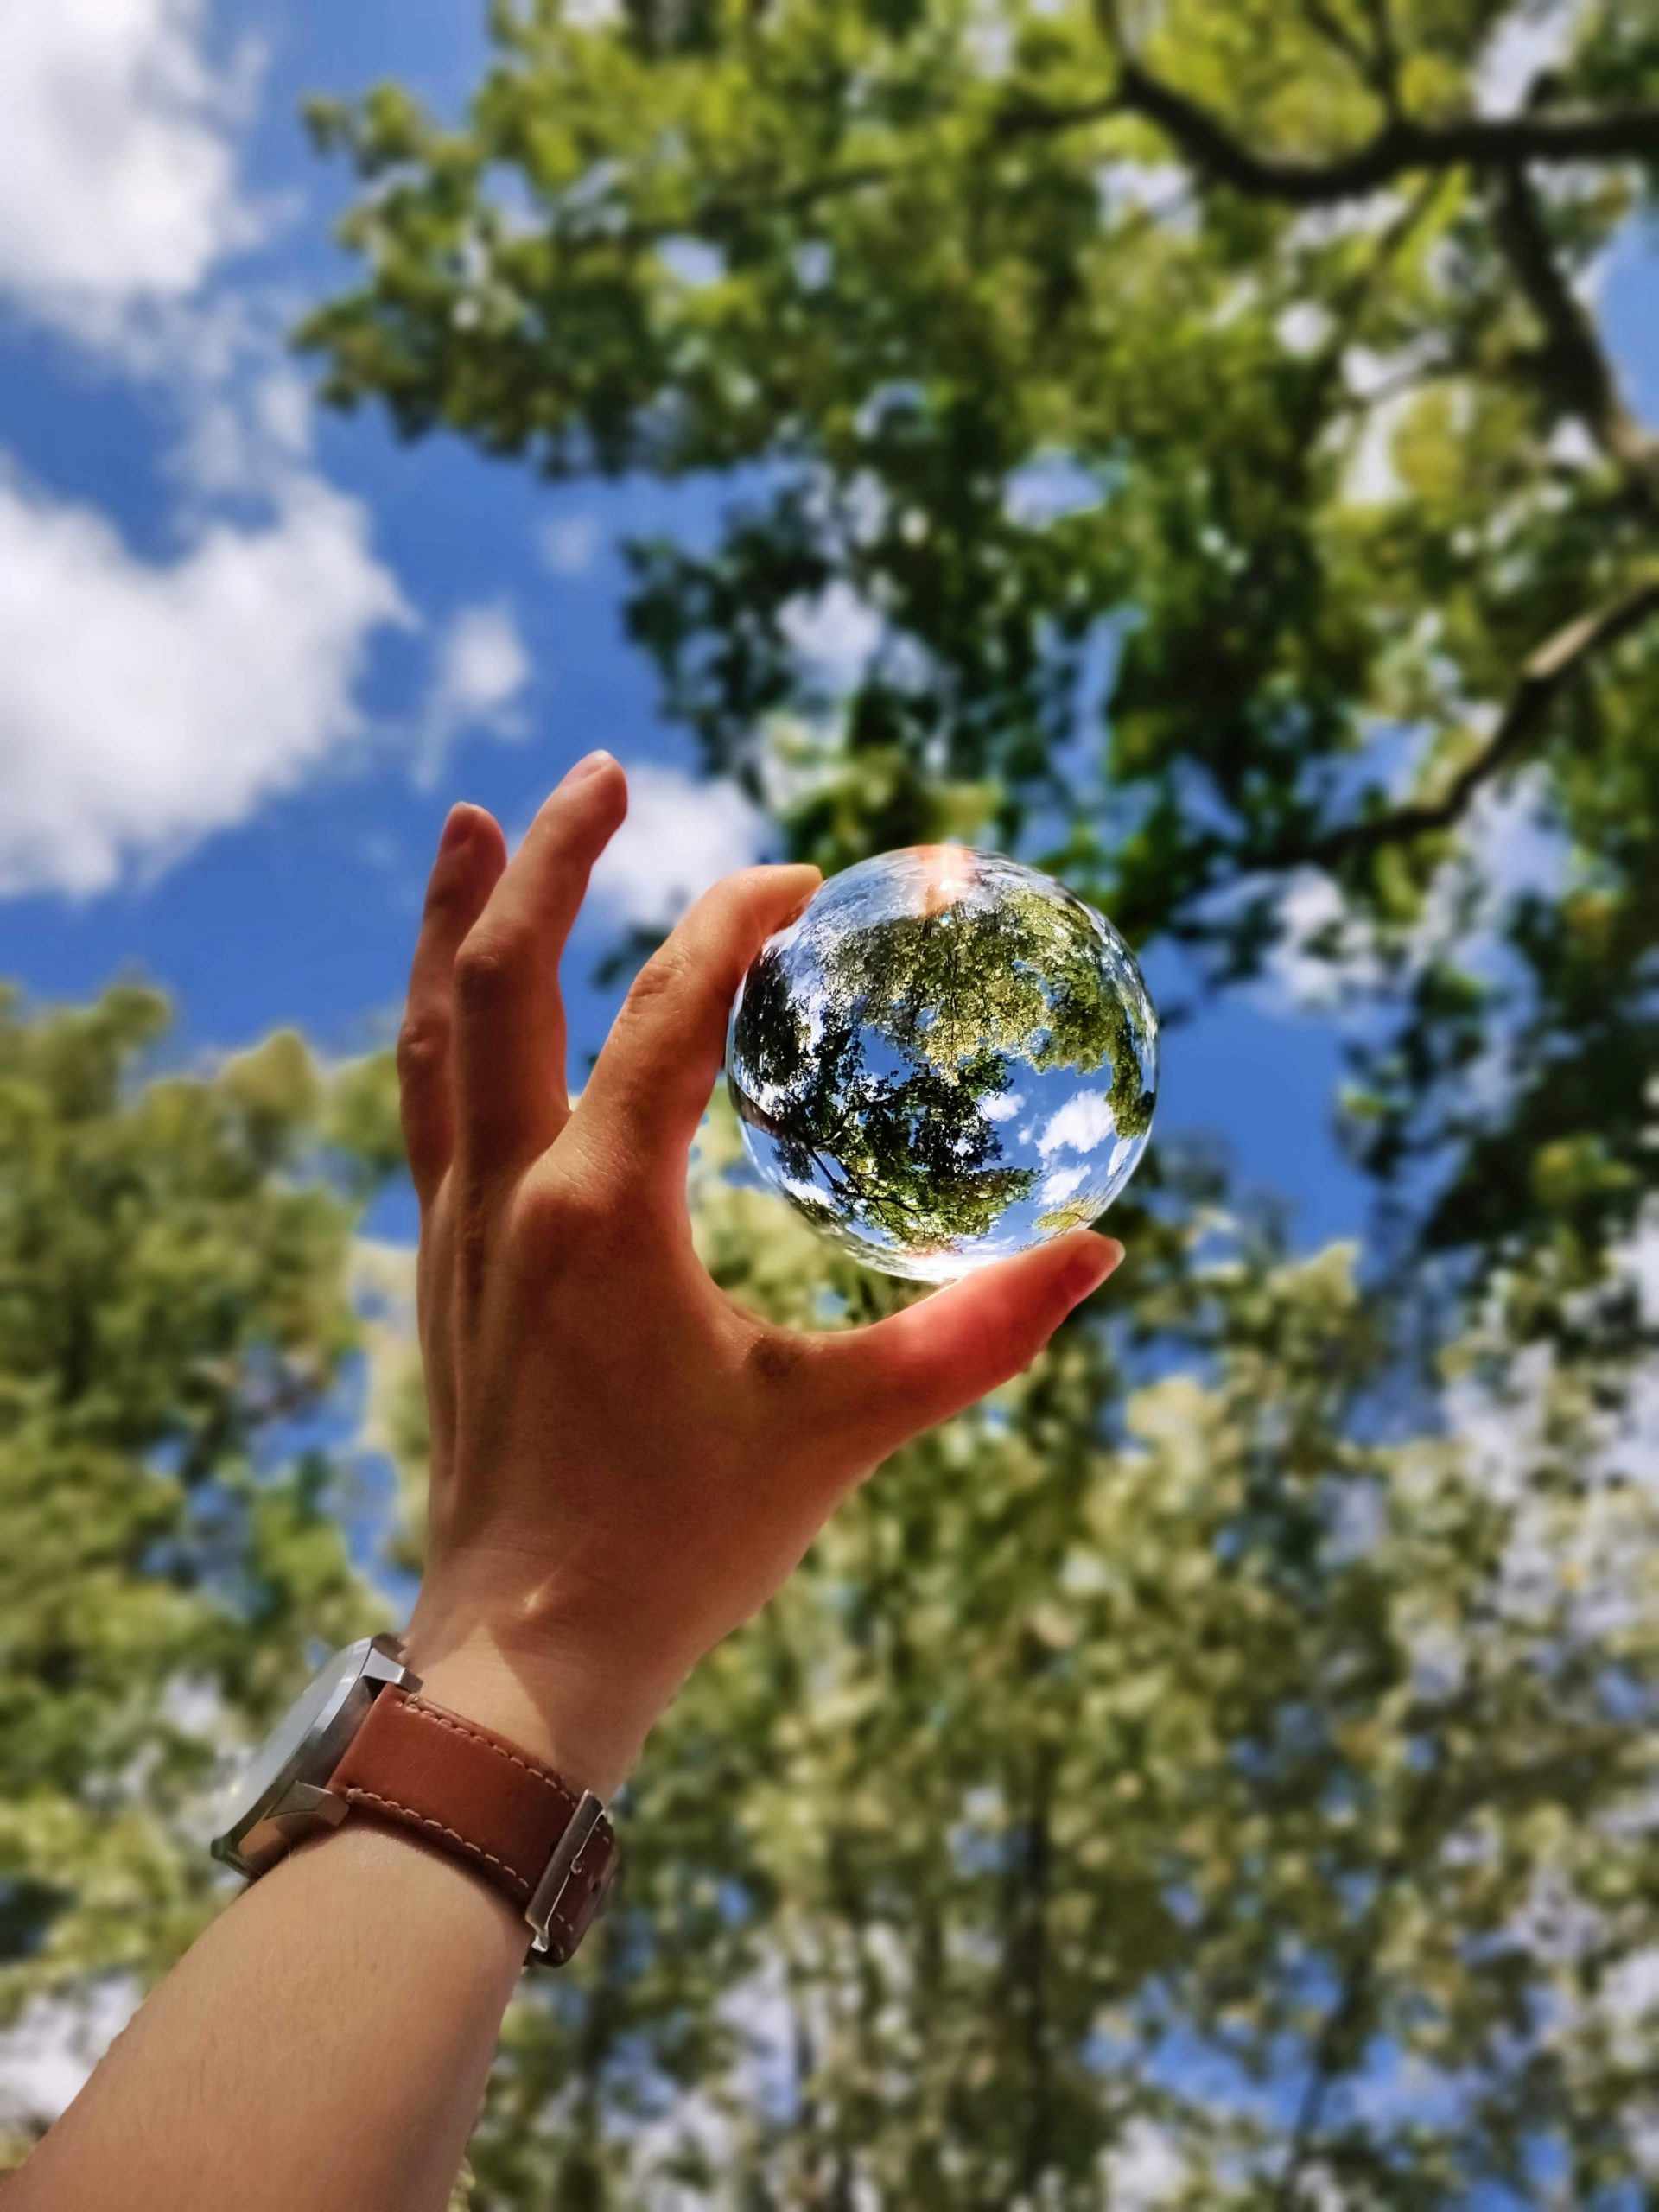 Hand holding a glass globe reflecting trees under a blue sky, symbolizing a sustainable and interconnected world.